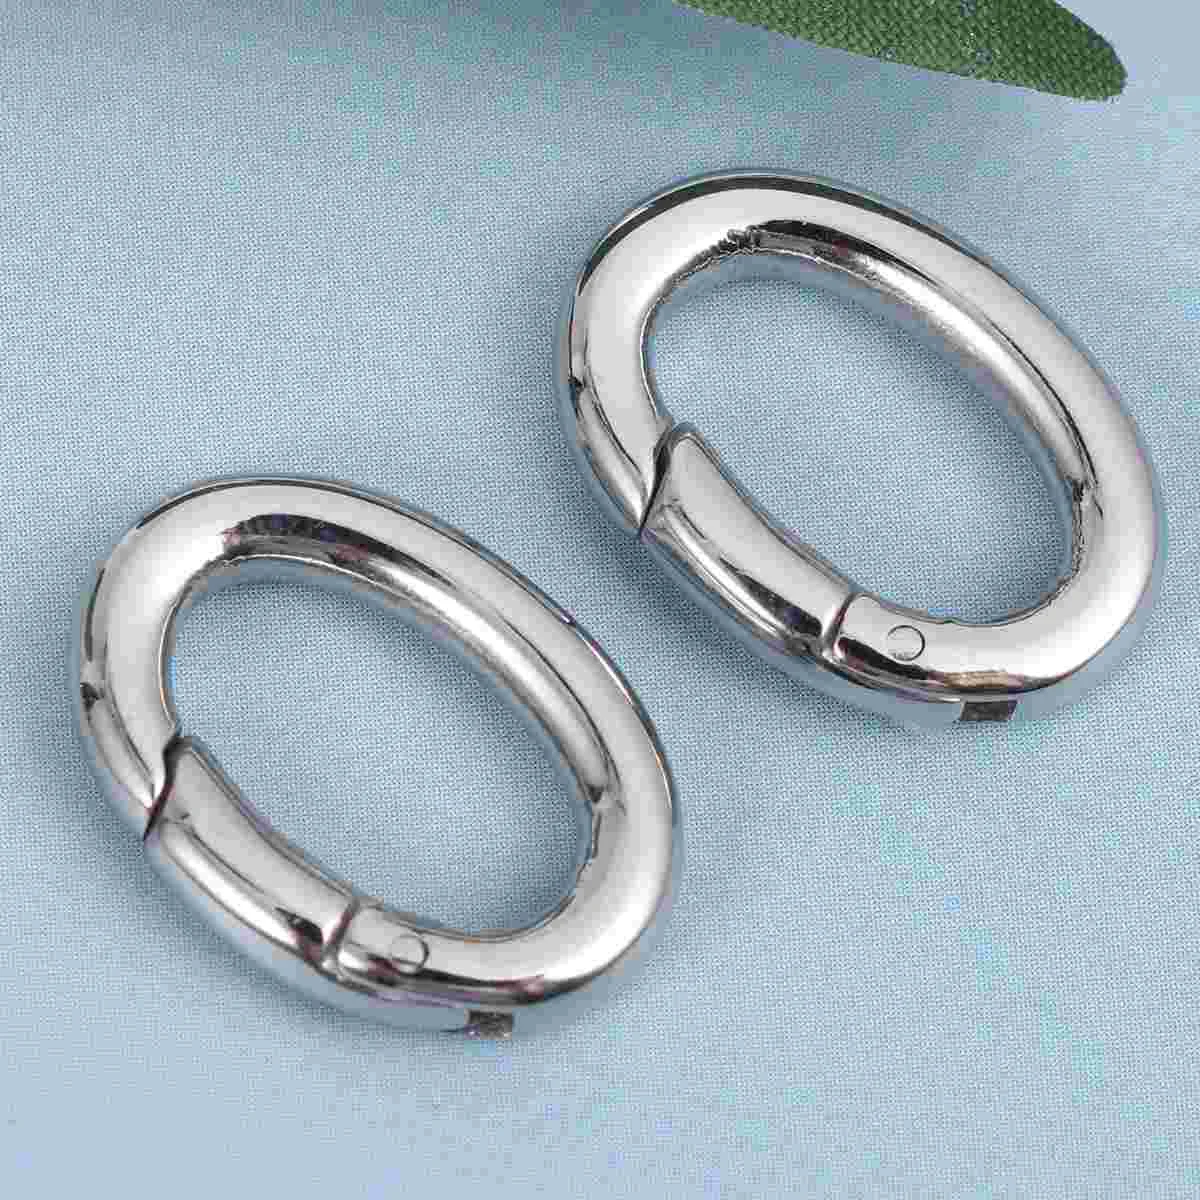 

2pcs Stainless Steel Spring Oval Rings Carabiner Snap Clip Hooks Keyring Buckle DIY Craft Making Accessories for Bag Purse